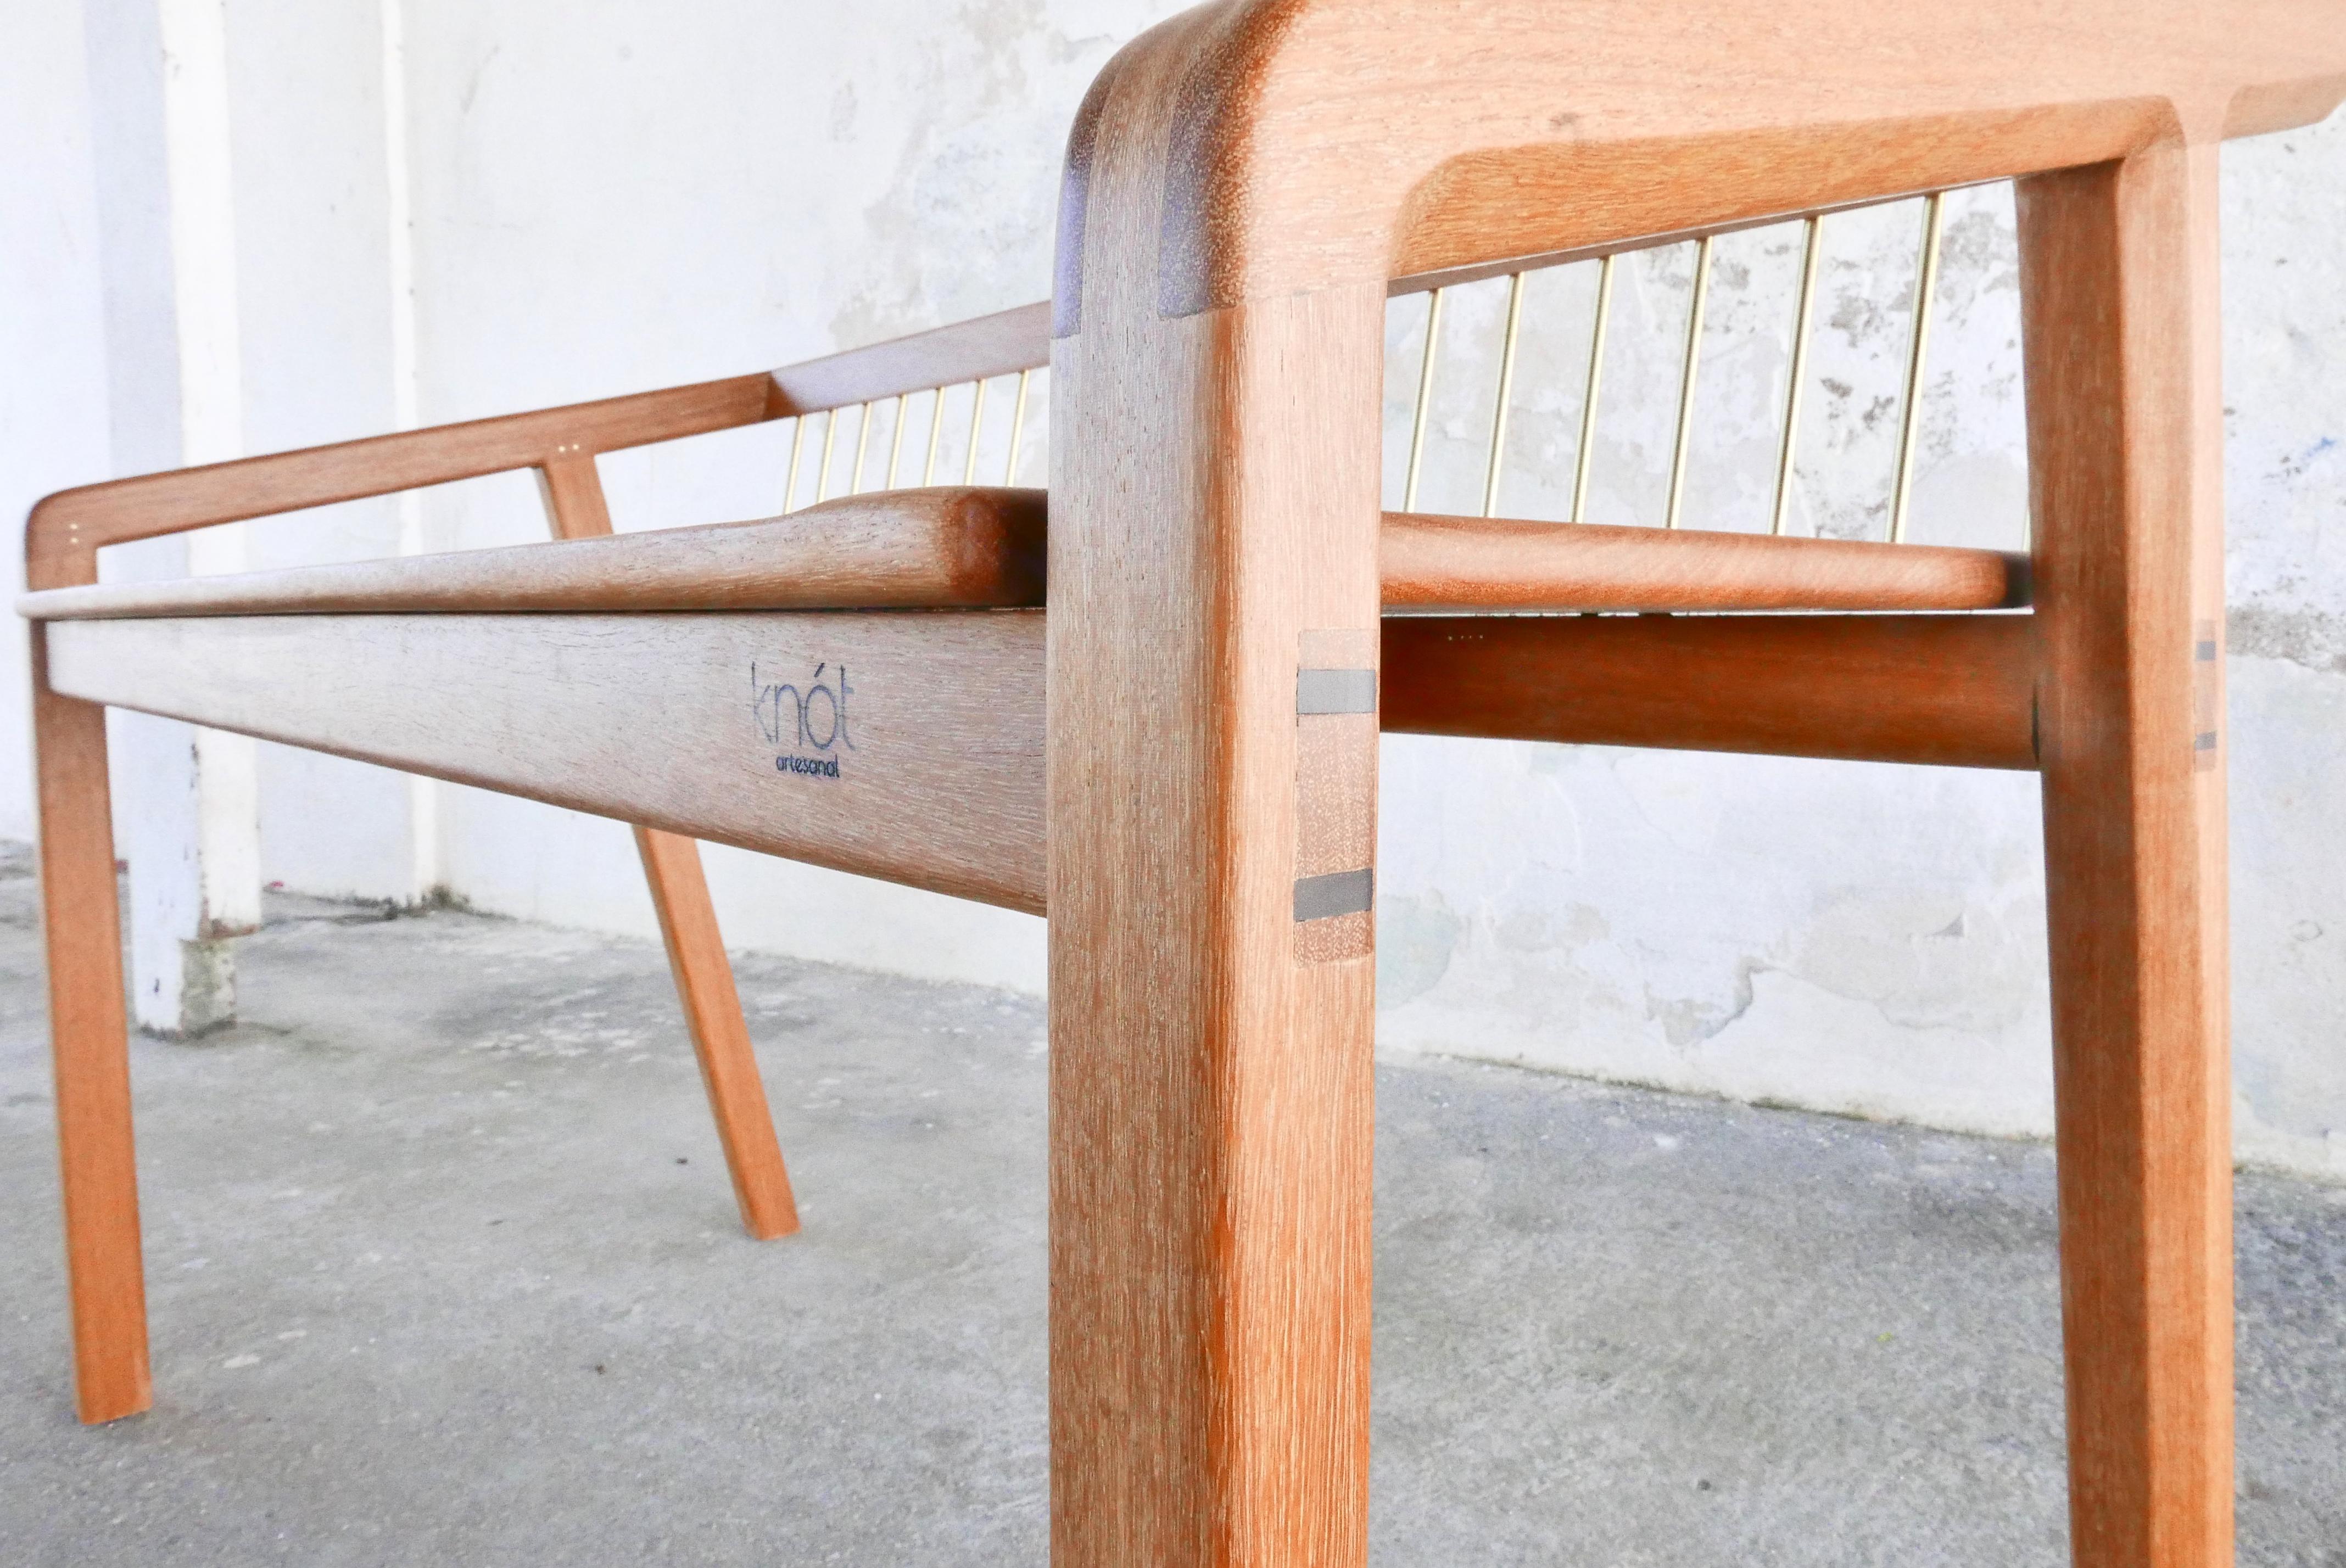 Hand-Crafted 'Canela II' Mid-Century Modern Bench in Brazilian Hardwood by Knót Artesanal For Sale